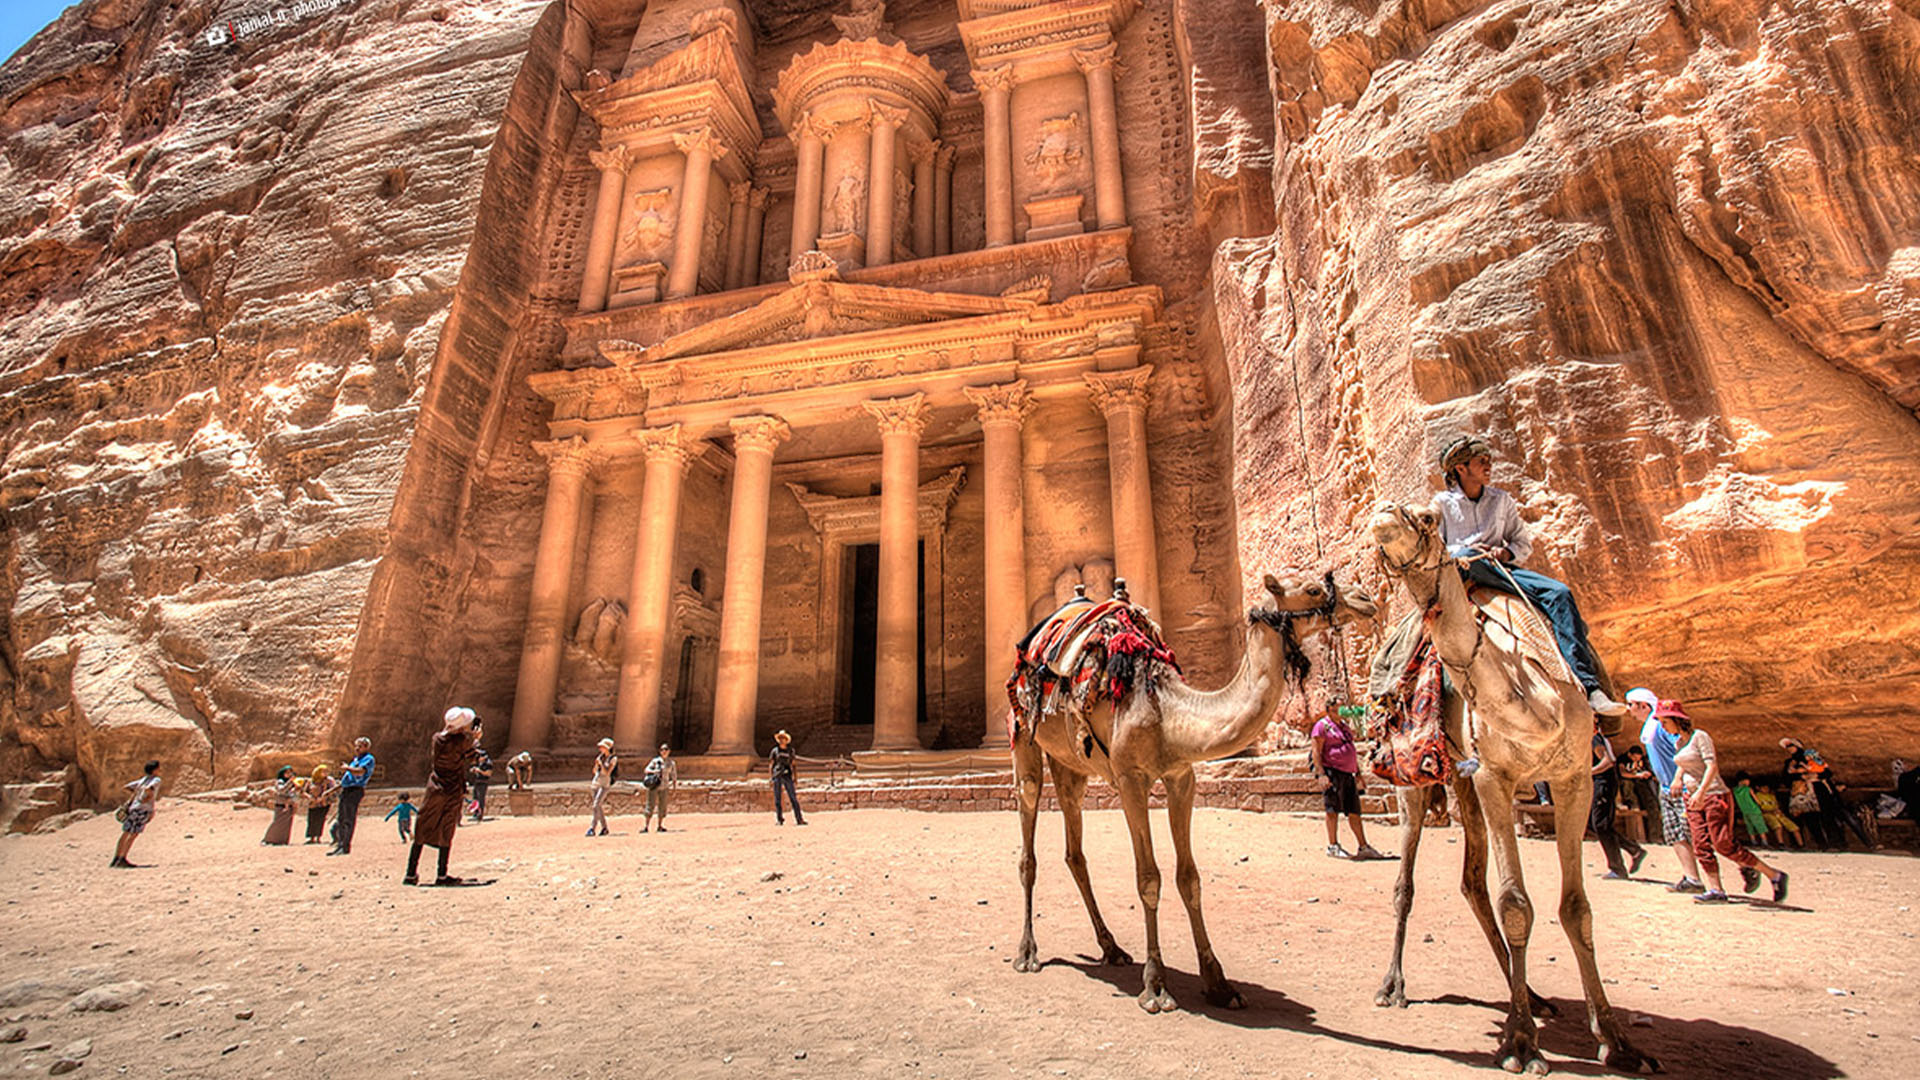 A panoramic photograph immortalizes the awe-inspiring rock-cut architecture of Petra, where two camels take center stage in the foreground, while in the background, a diverse array of international tourists.